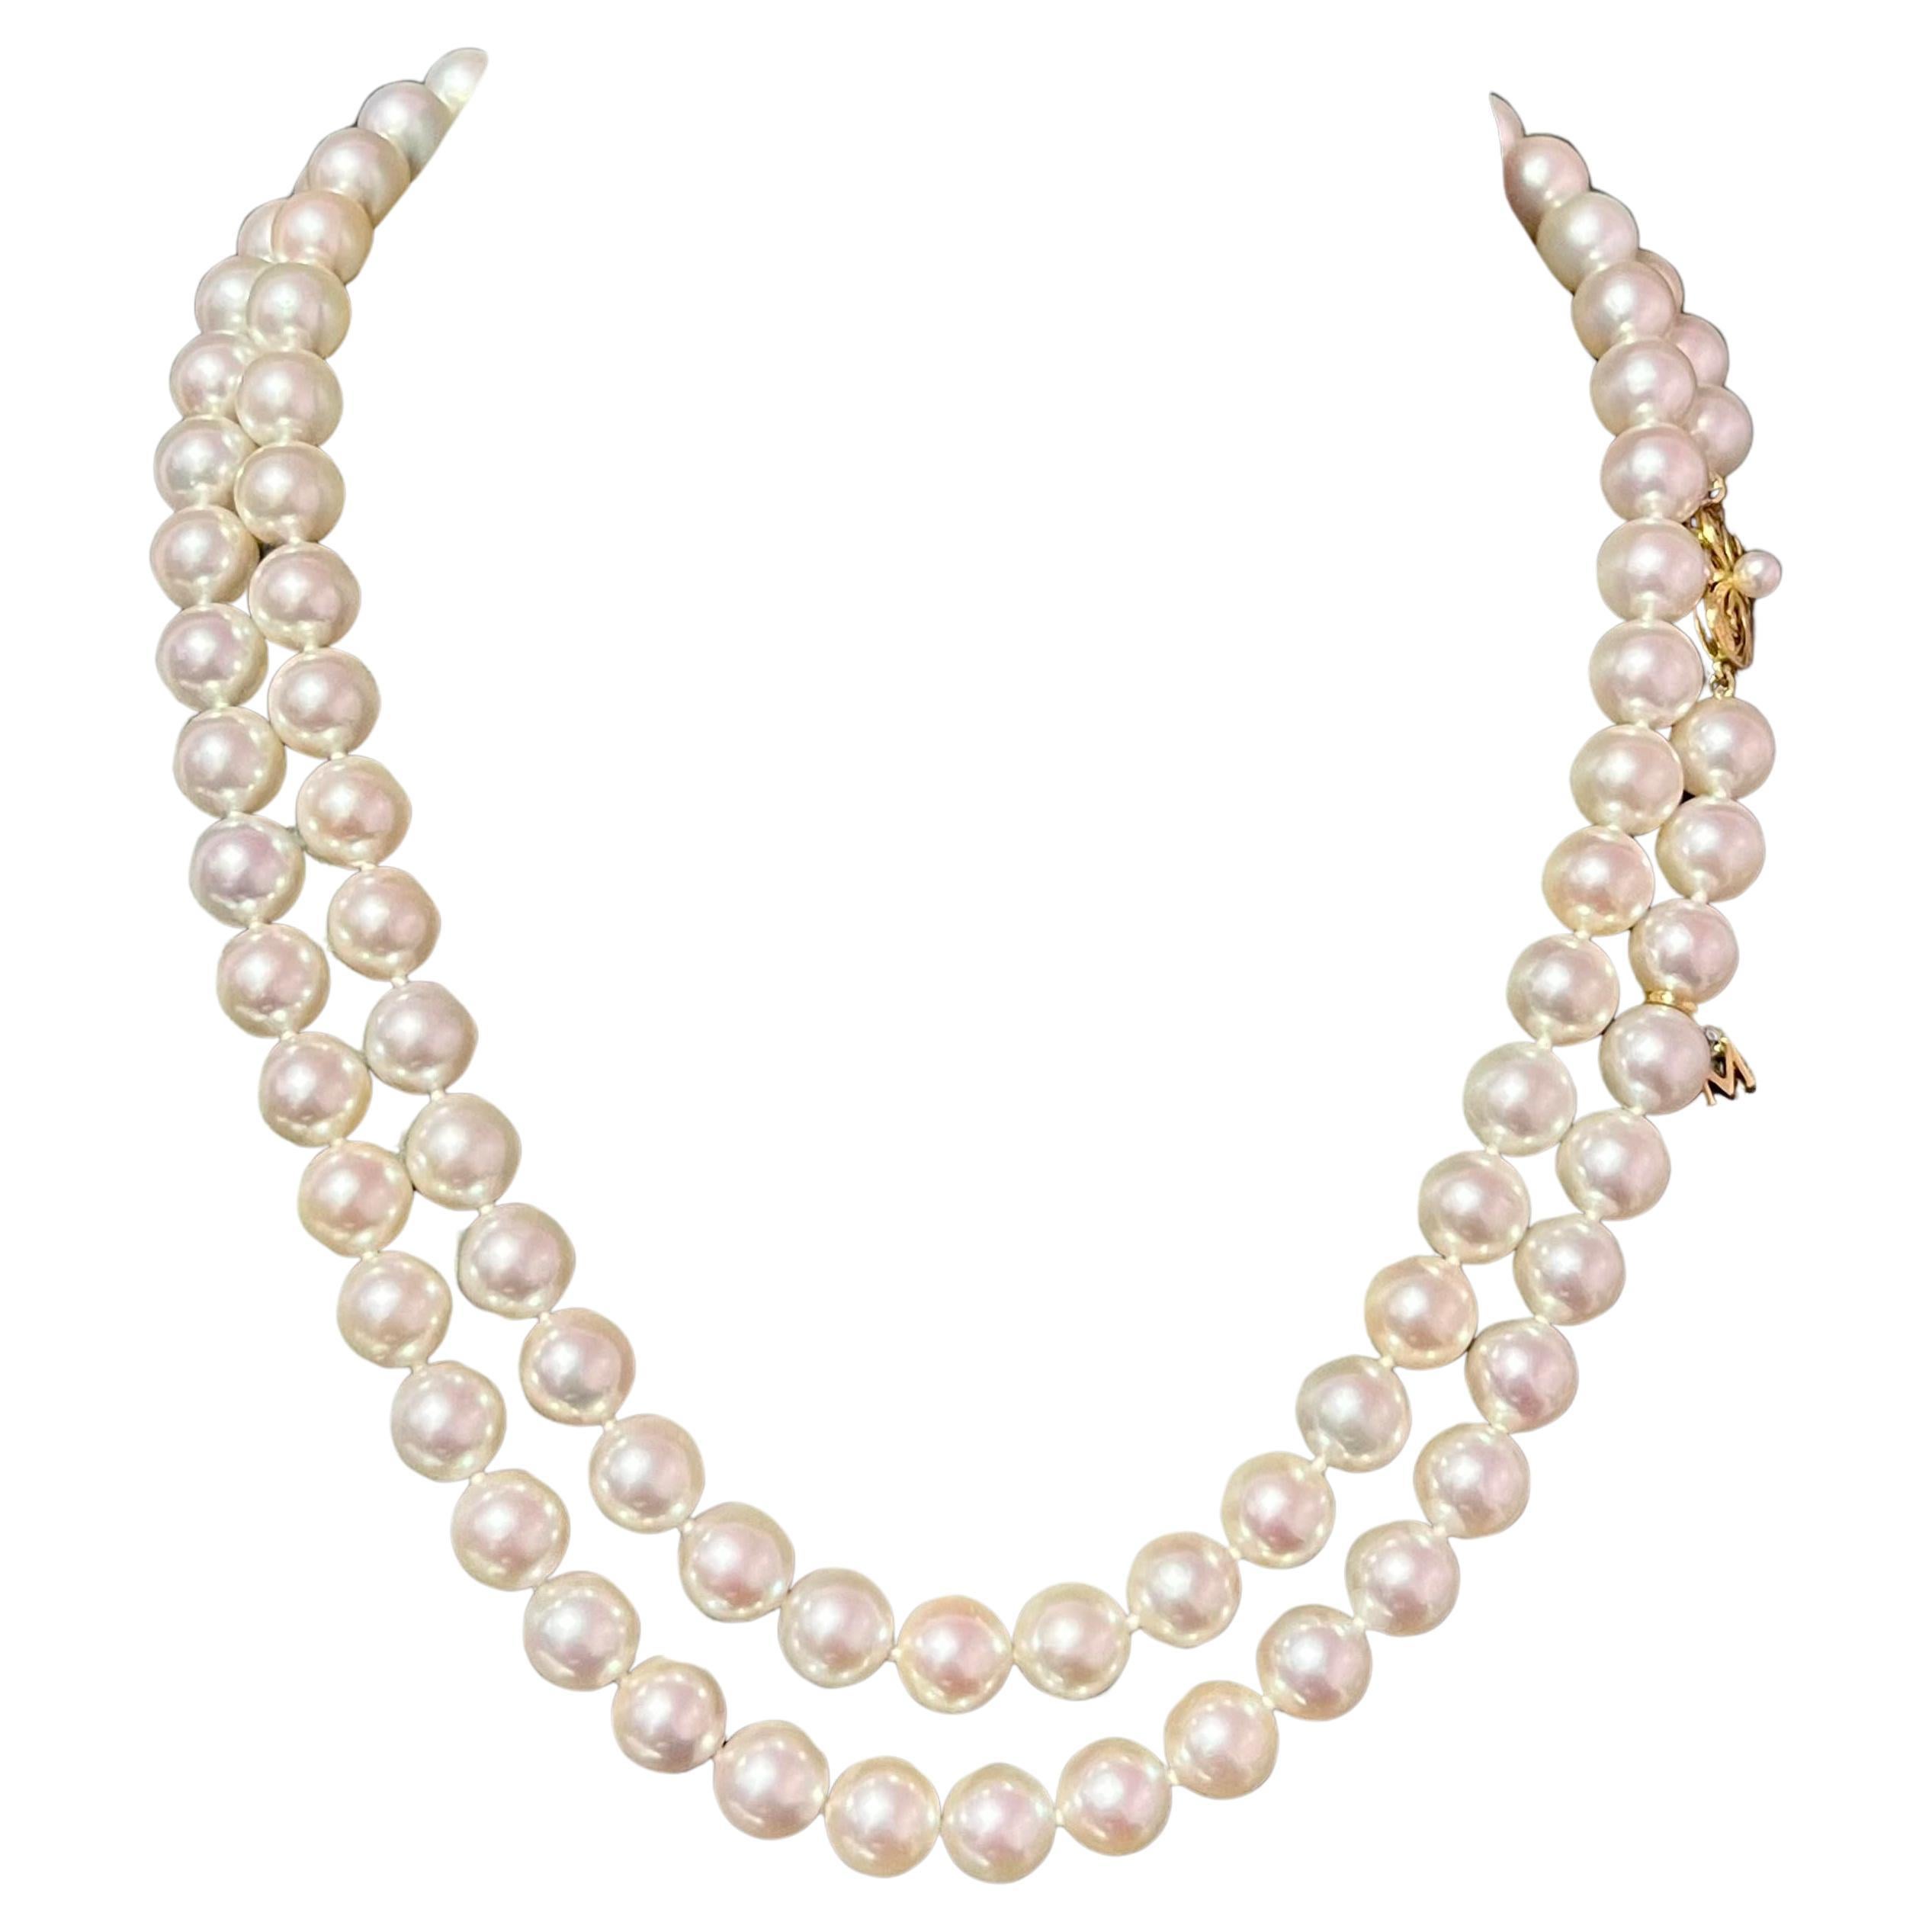 How can I tell if Mikimoto pearls are vintage?